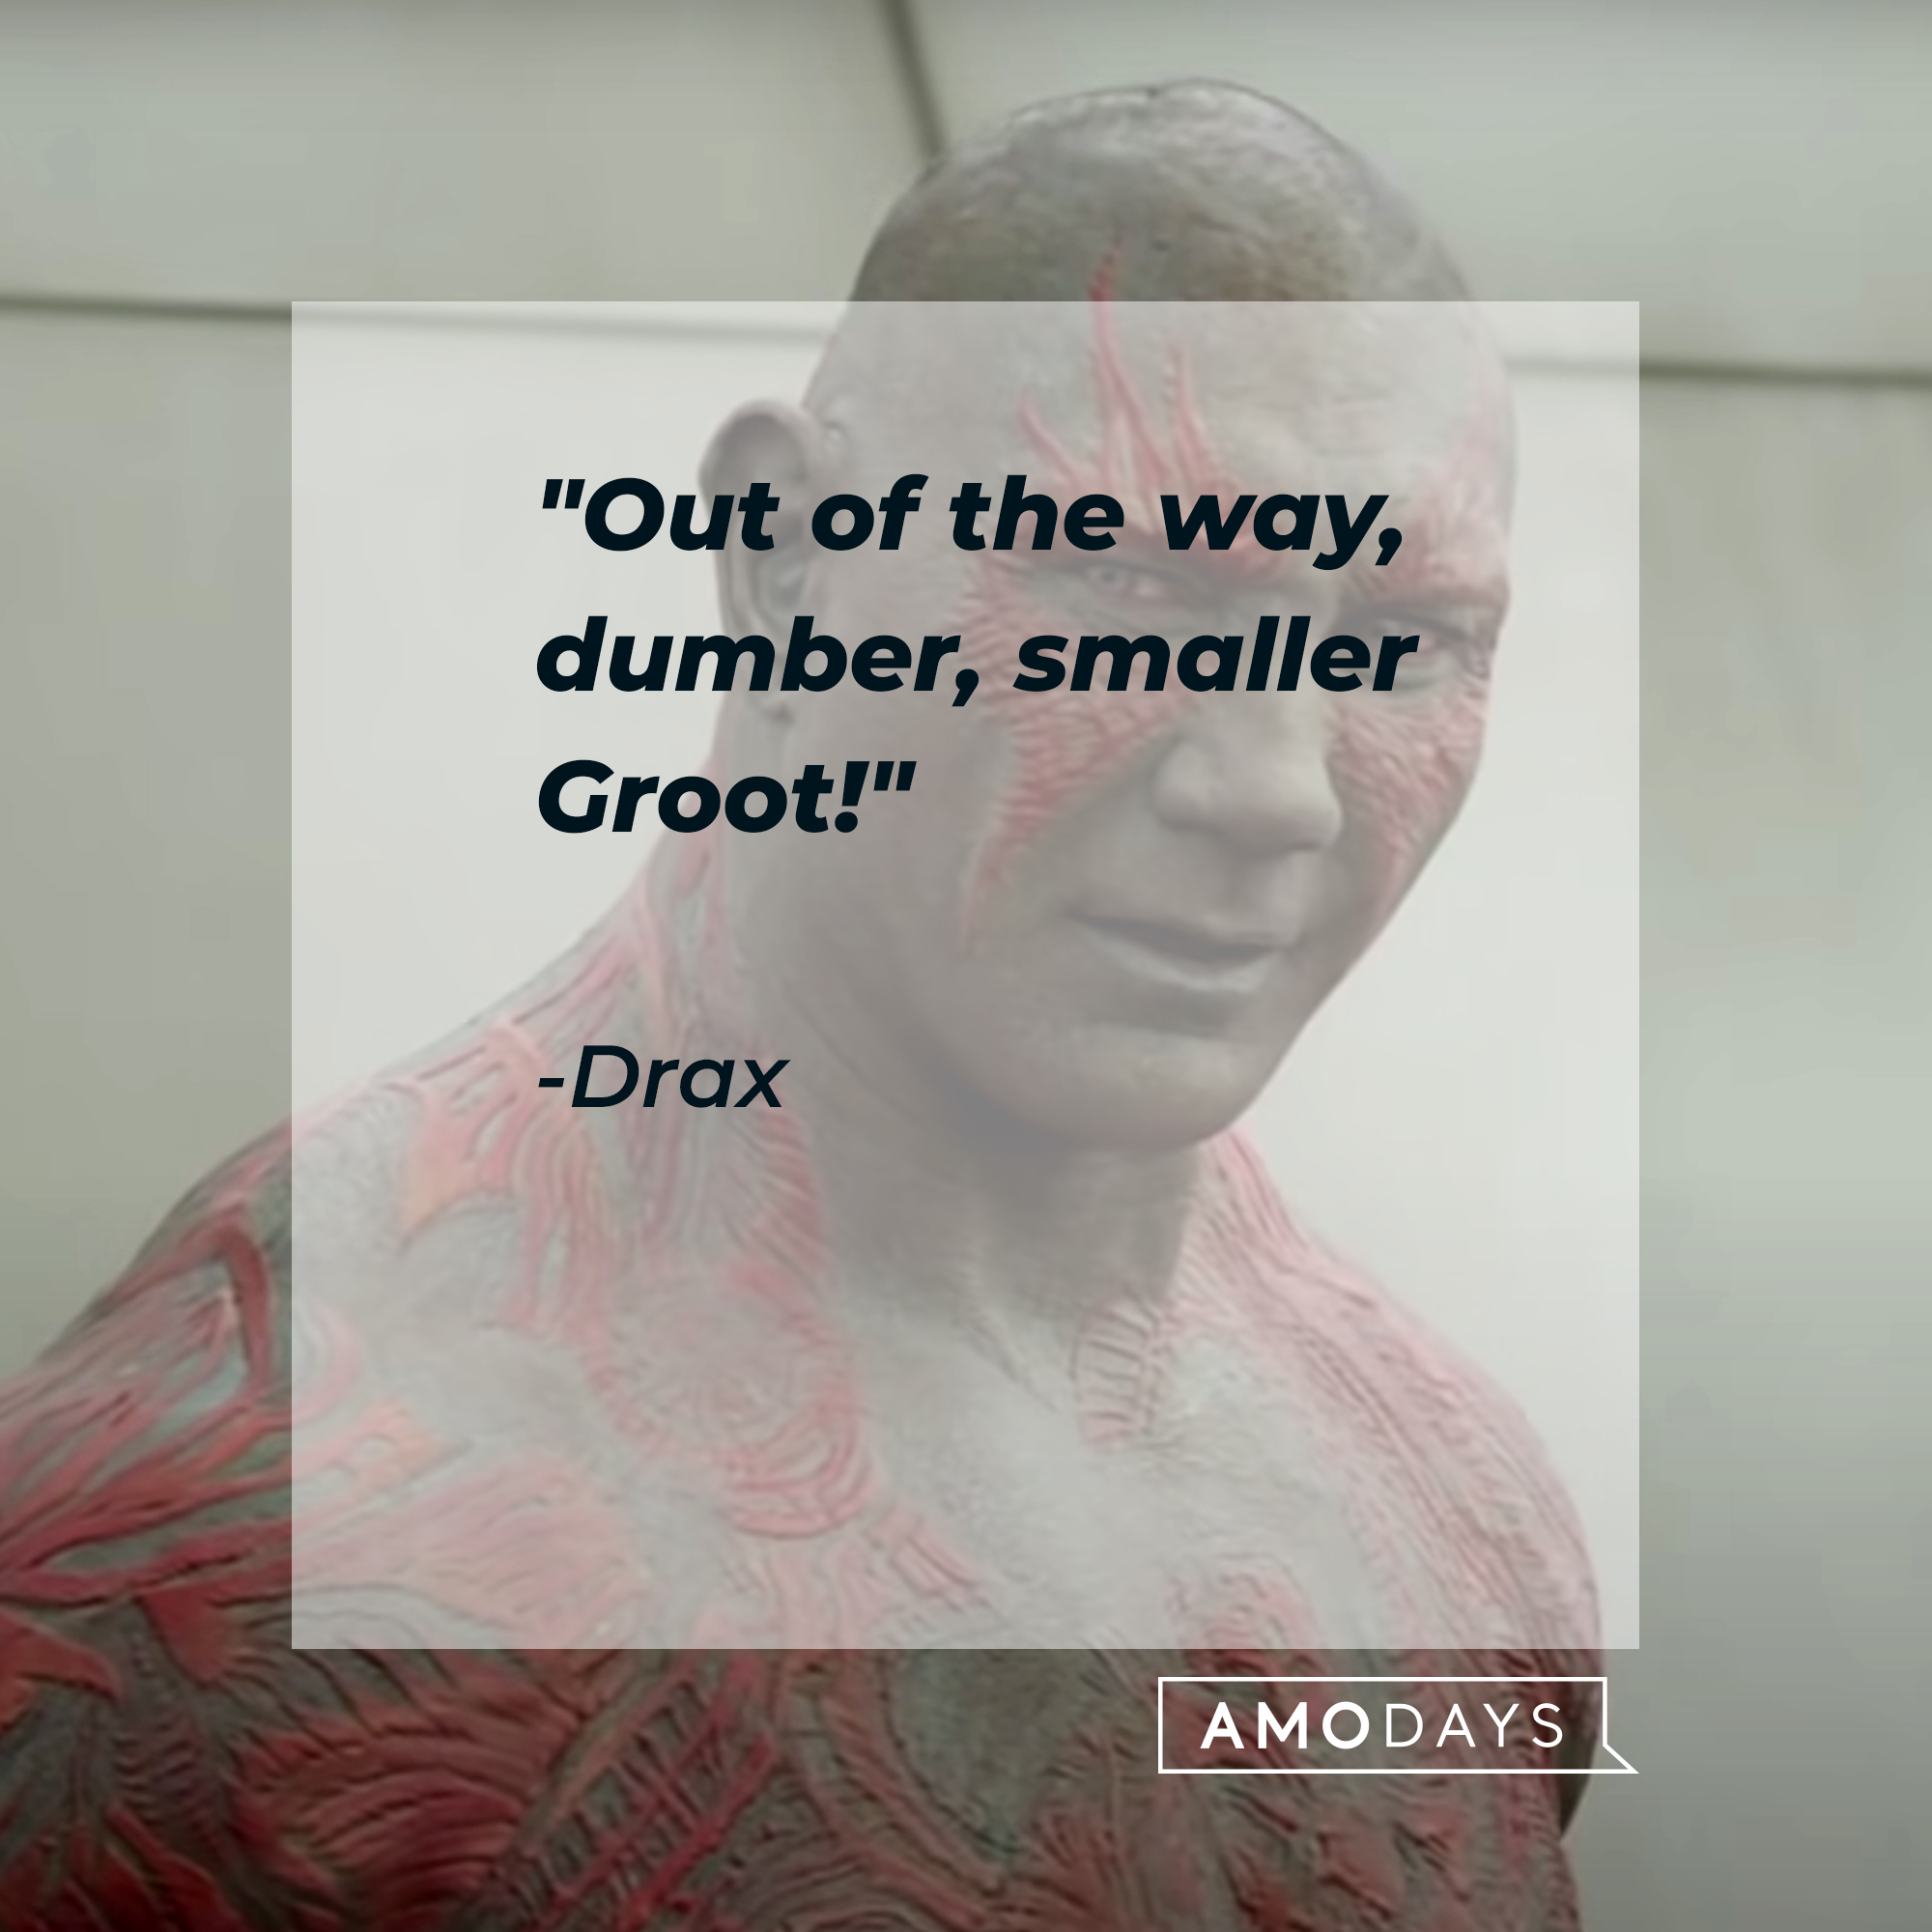 Drax's quote, "Out of the way, dumber, smaller Groot!" | Image: youtube.com/marvel